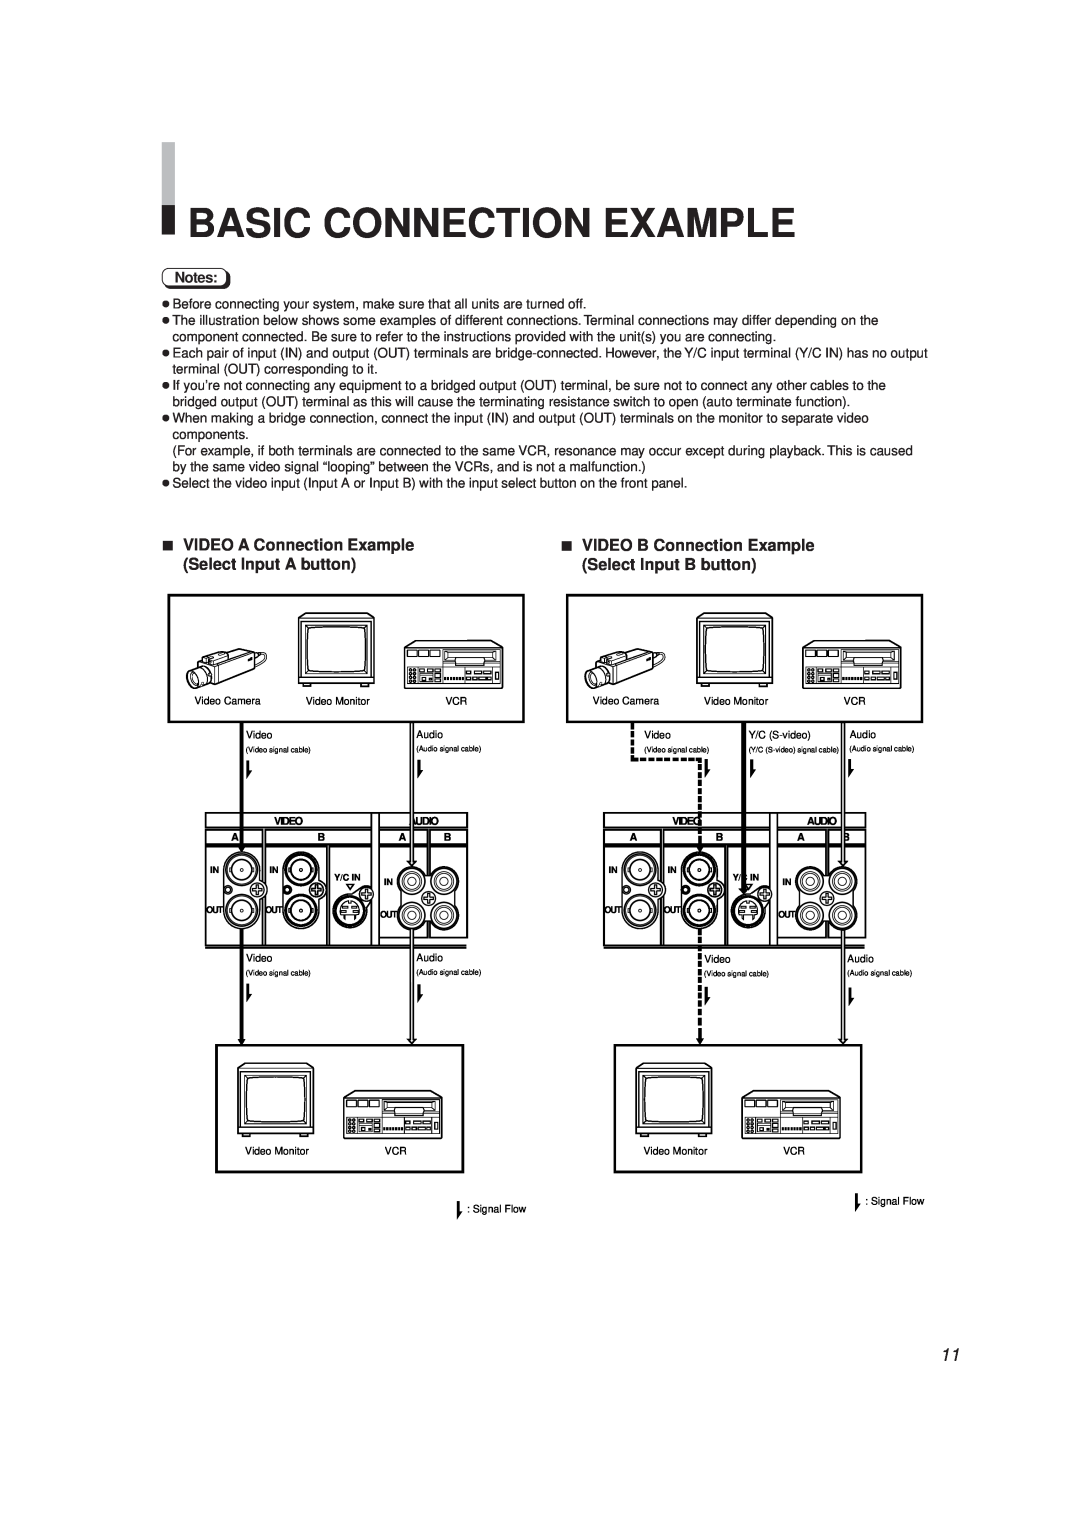 JVC TM-A130SU manual Basic Connection Example, VIDEO A Connection Example Select Input A button 